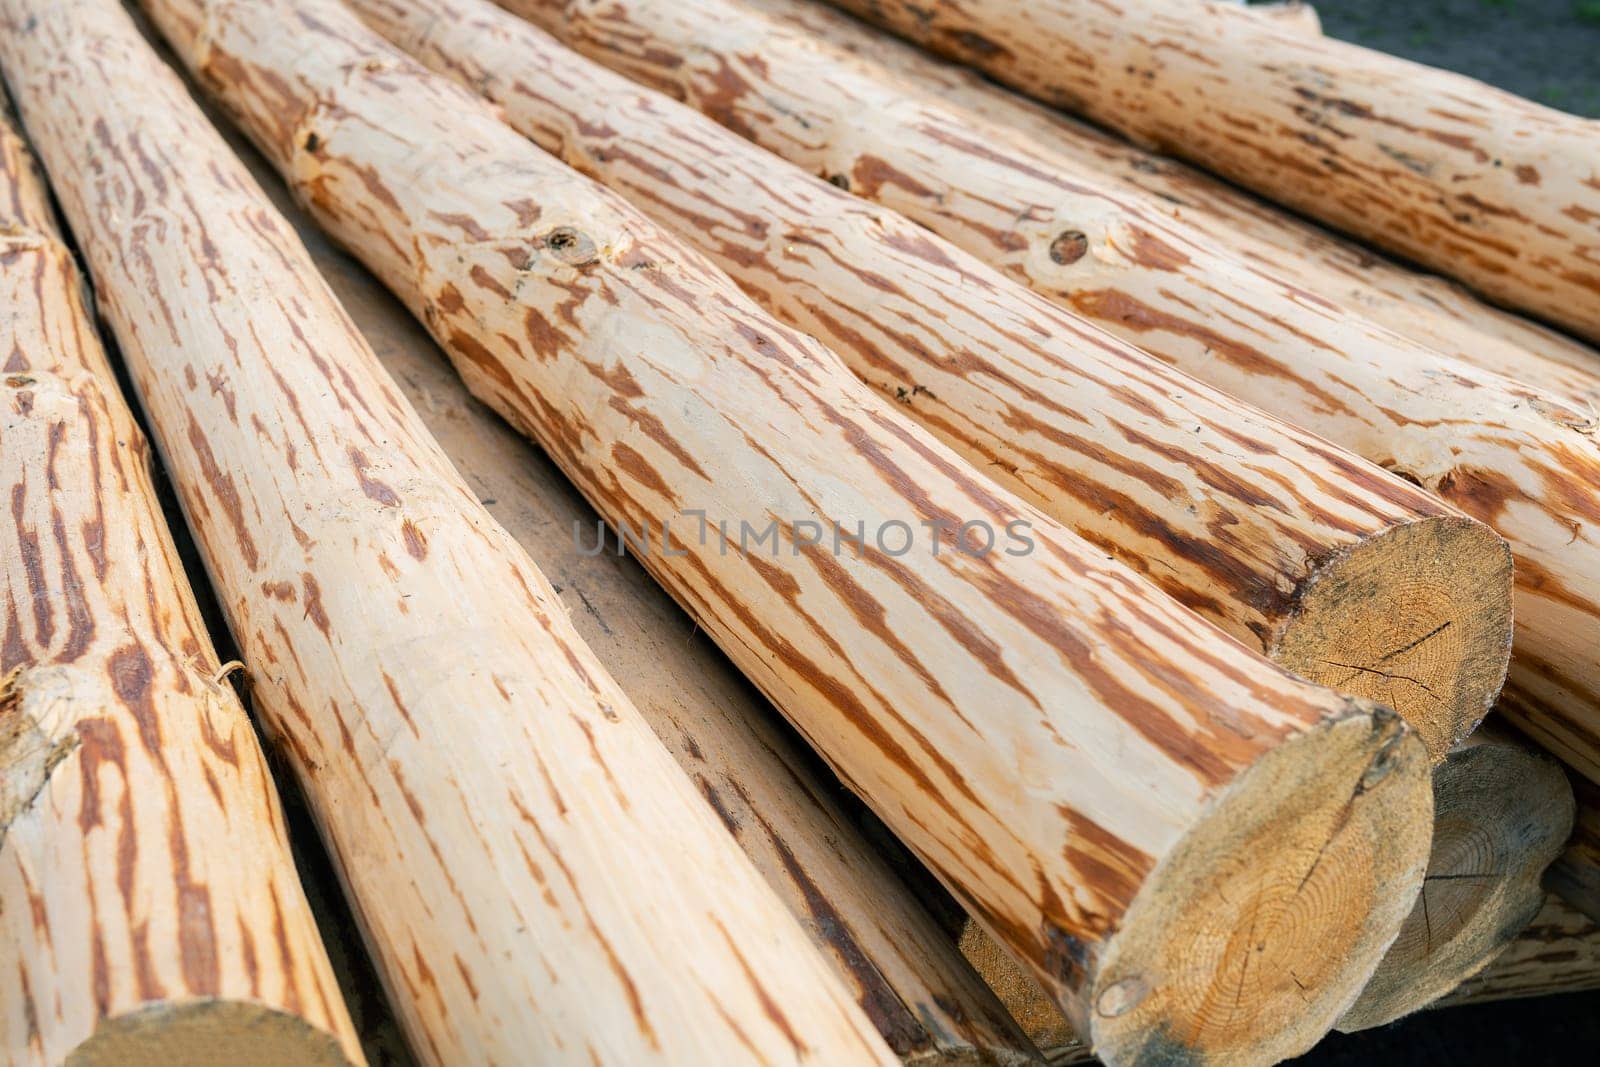 A close-up photograph of a pile of rough-textured wooden logs stacked on top of each other. Sawmill, agriculture